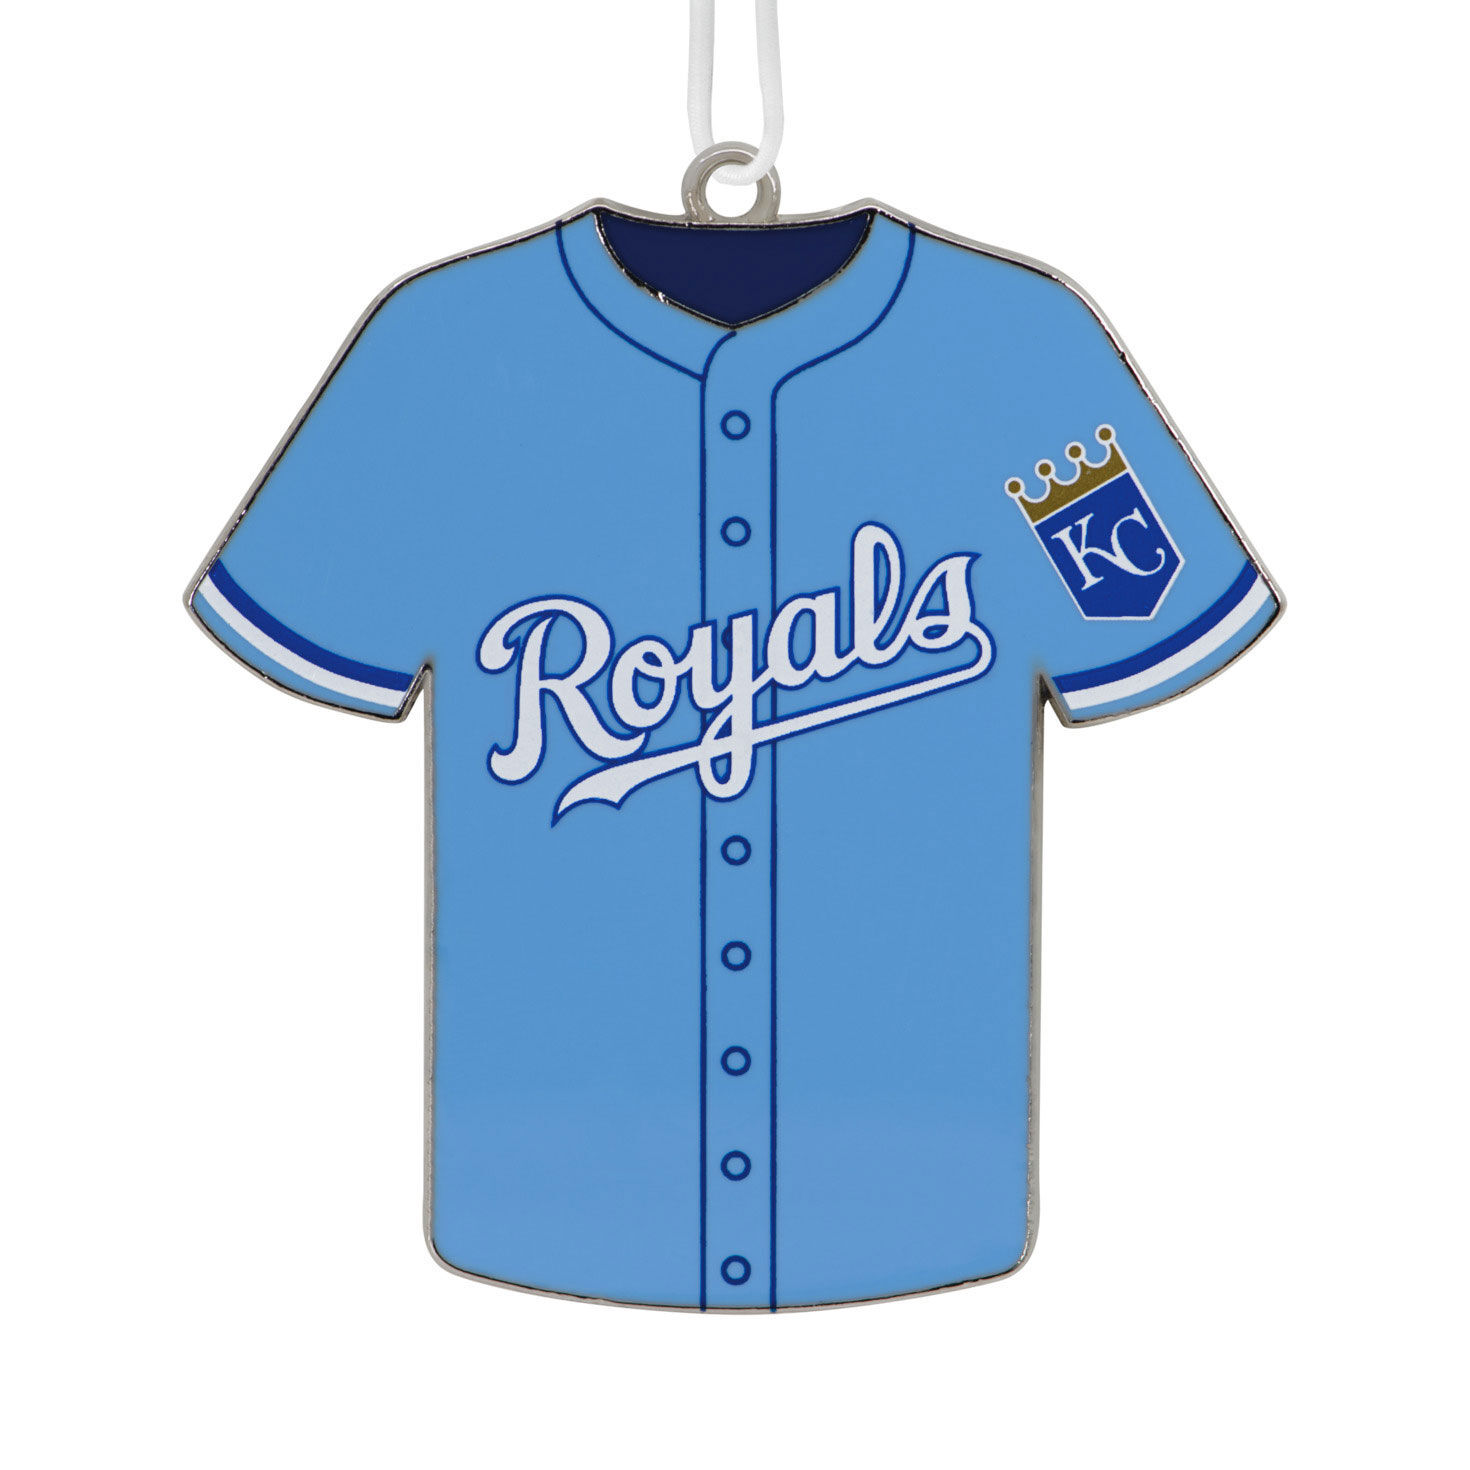 Kansas City Royals on X: After 14 years of hard work and